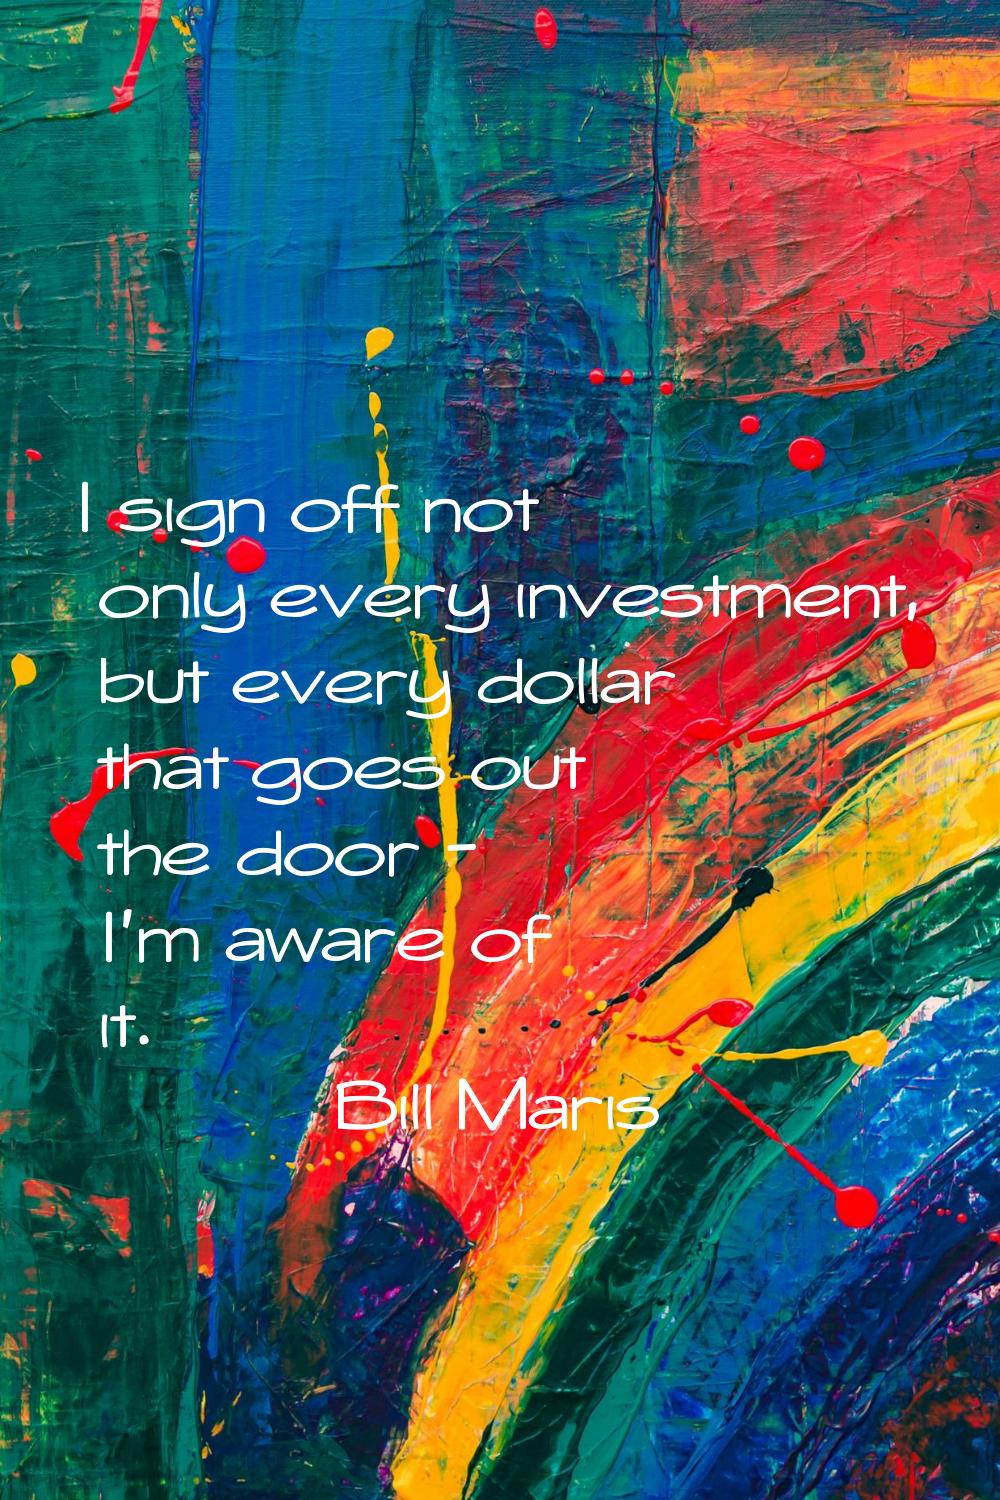 I sign off not only every investment, but every dollar that goes out the door - I'm aware of it.